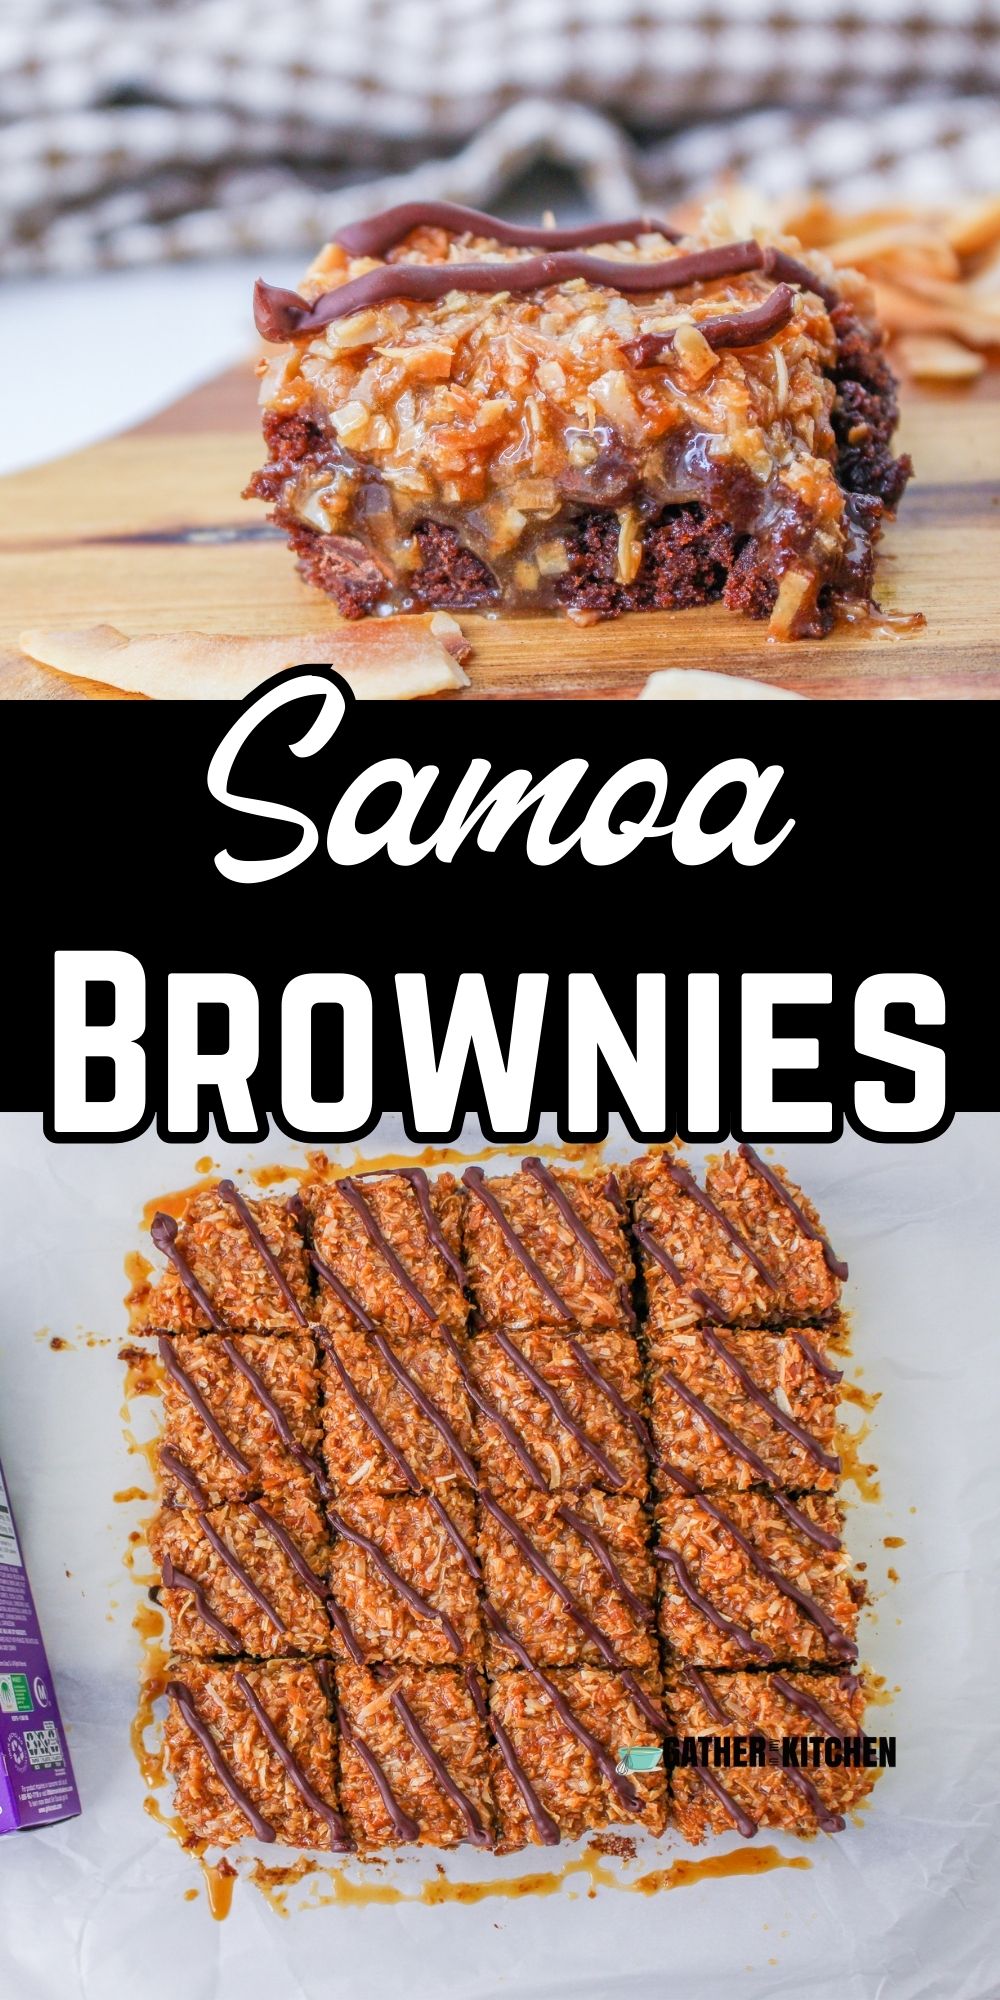 Pin image: top shows a closeup of a Samoa brownie, middle says "Samoa Brownies" and bottom is a top view of a Samoa Brownies.